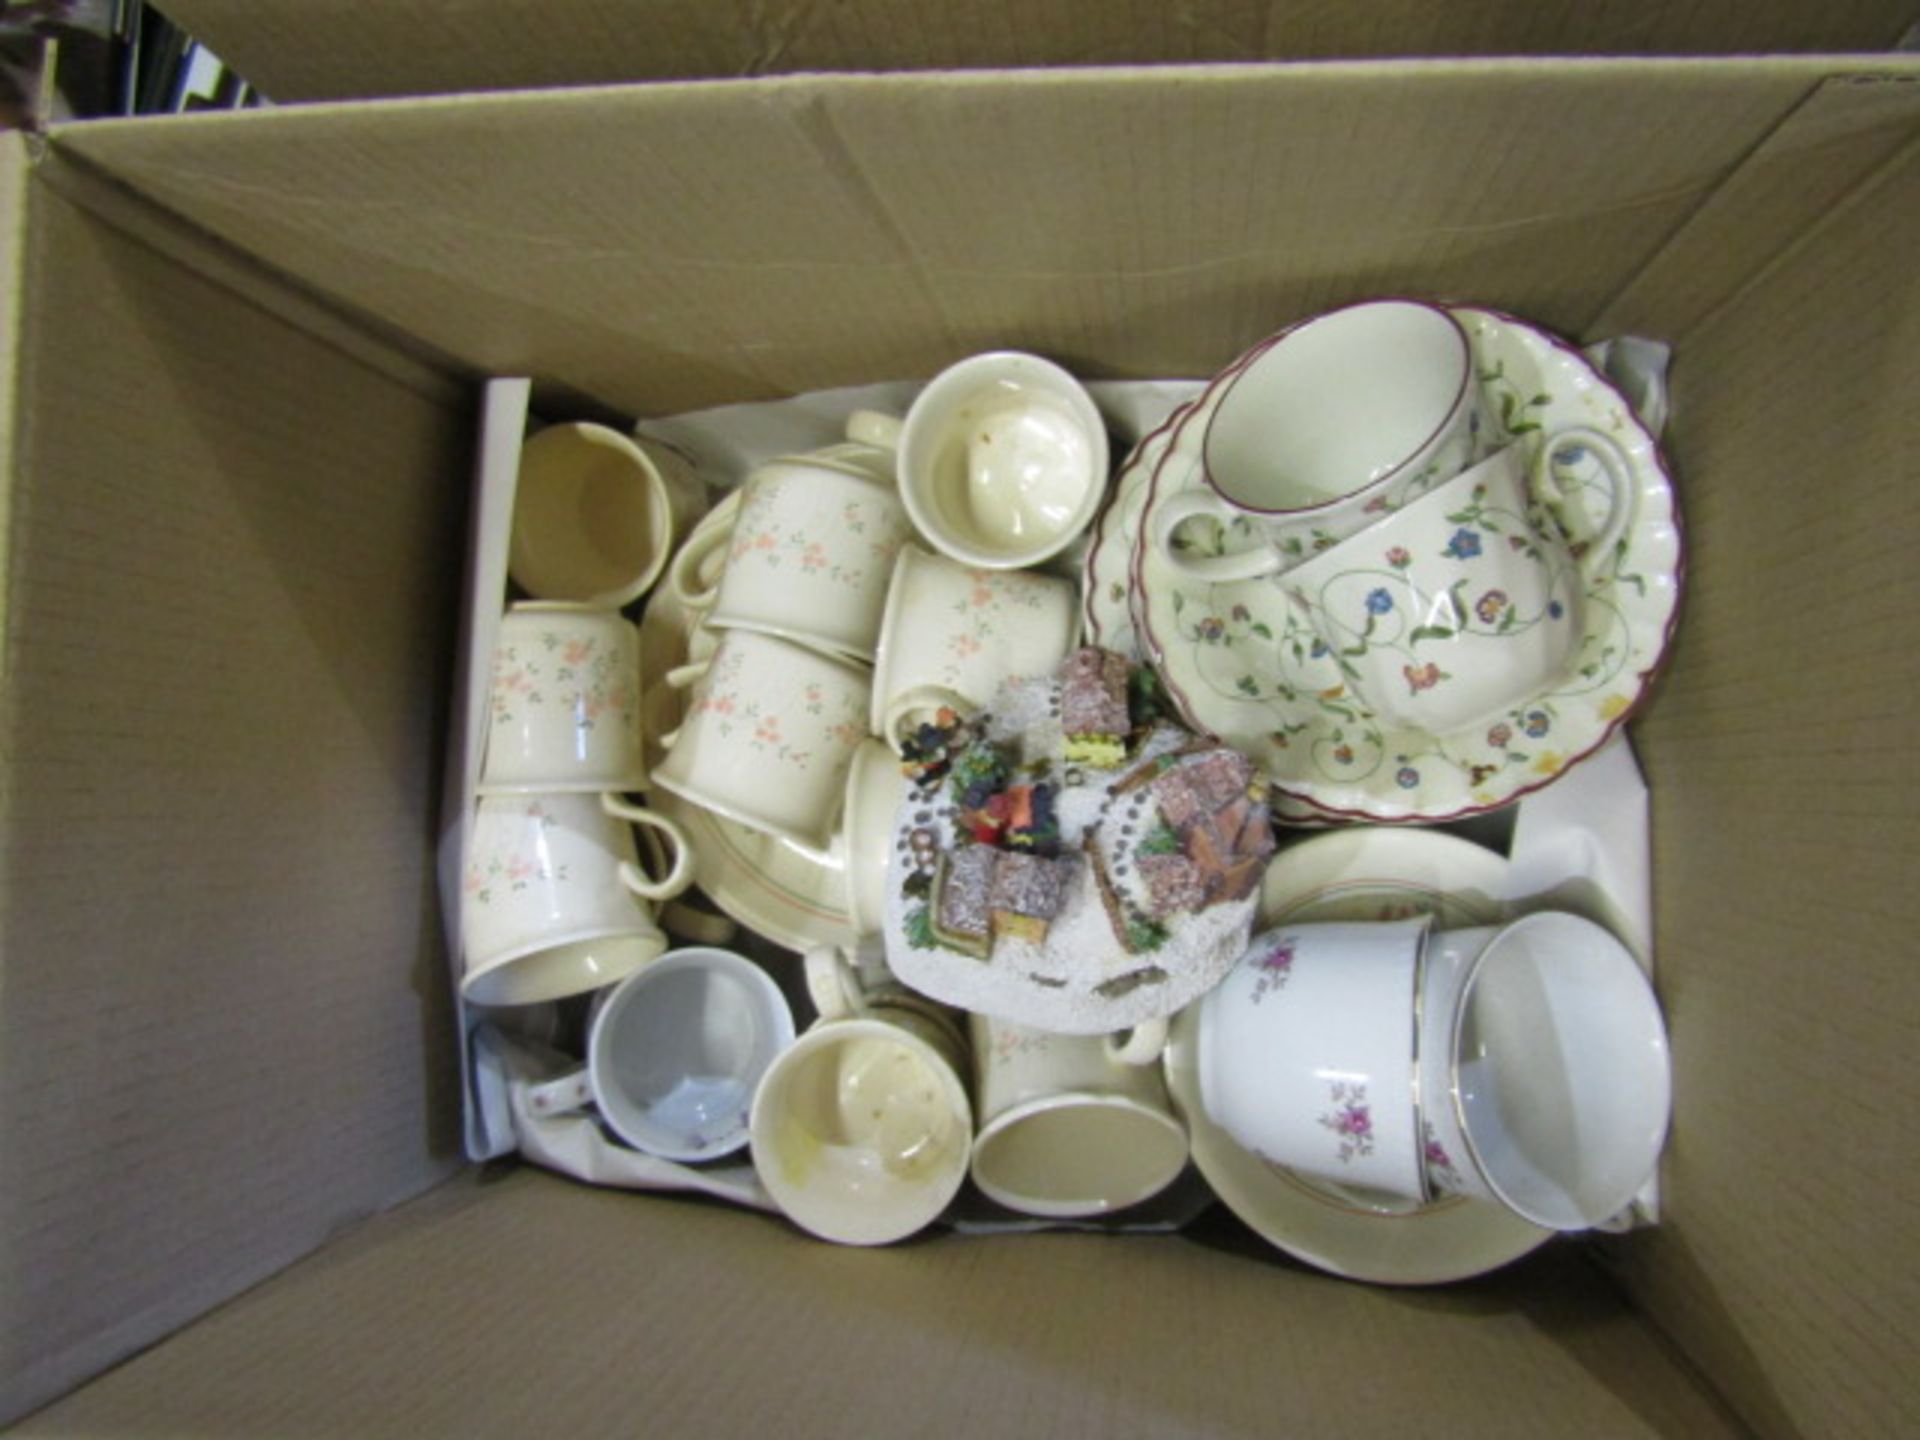 A stillage of china, glass and sundry items Stillage not included and all items must be removed - Image 4 of 15